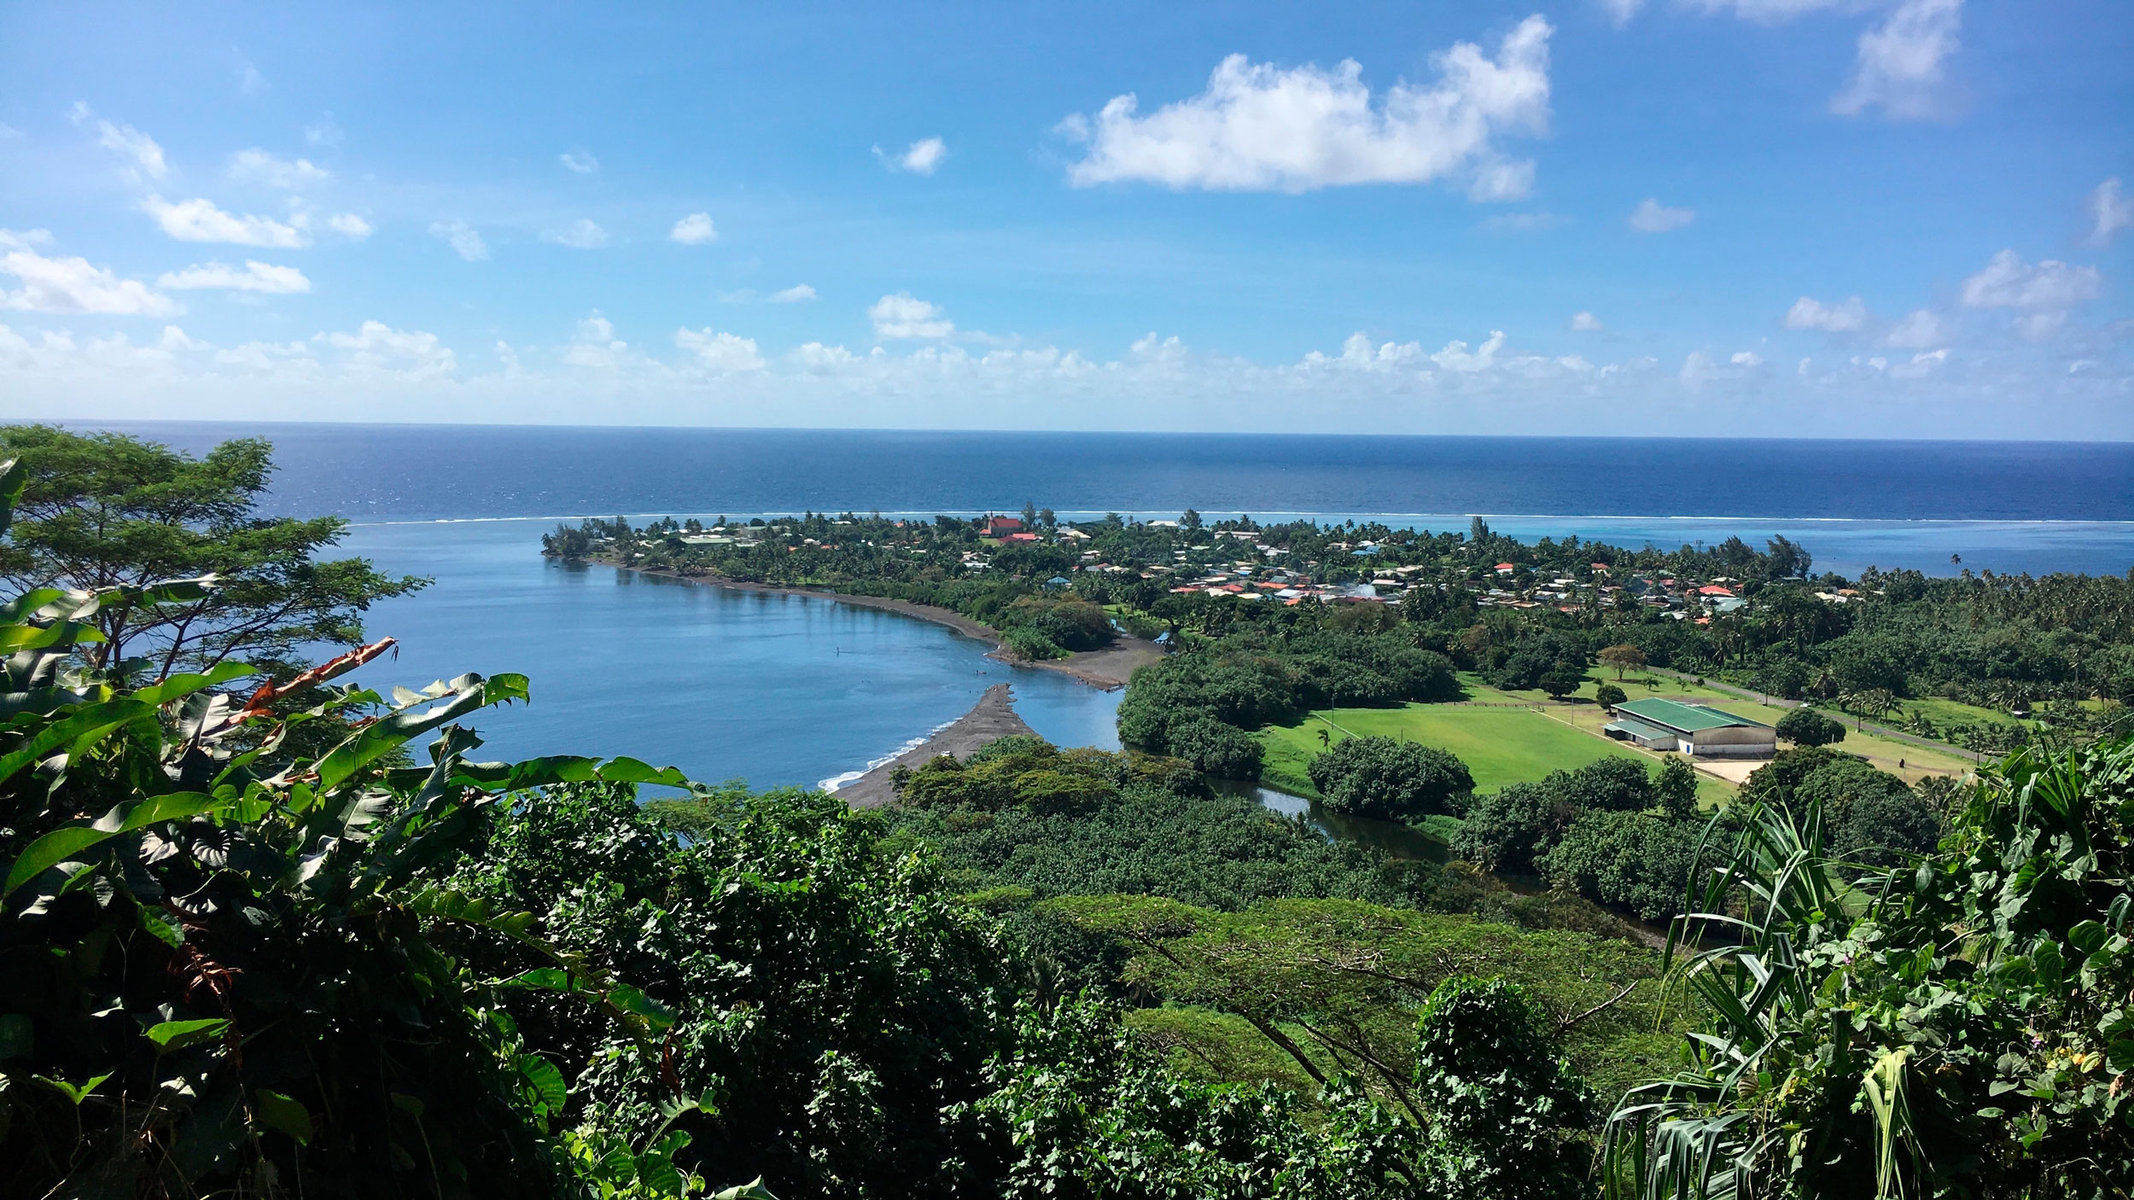 The village of Tautira, Tahiti, surrounded by trees and with ocean in the background.